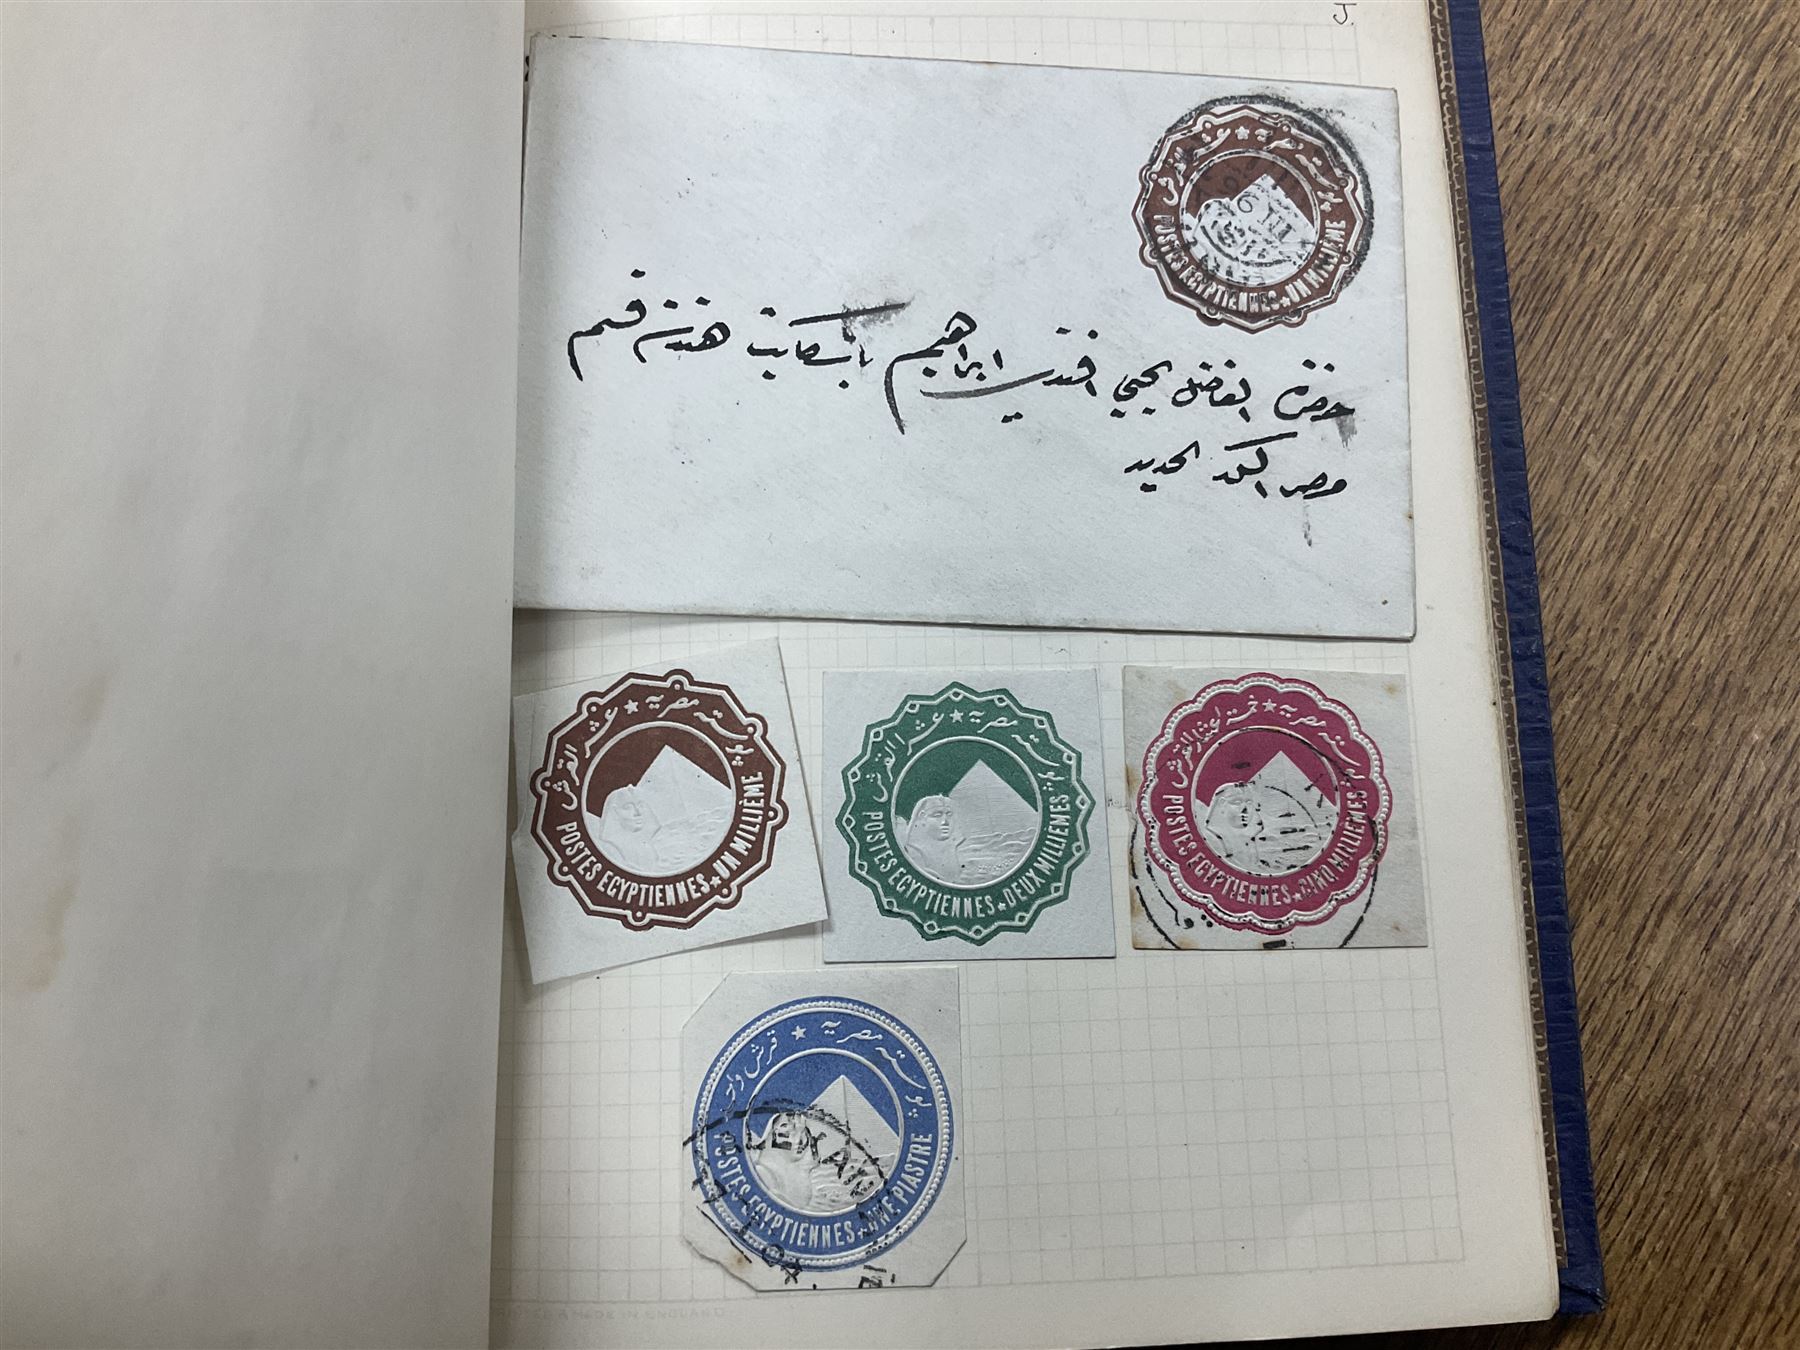 Egypt 1866 and later stamps - Image 618 of 761